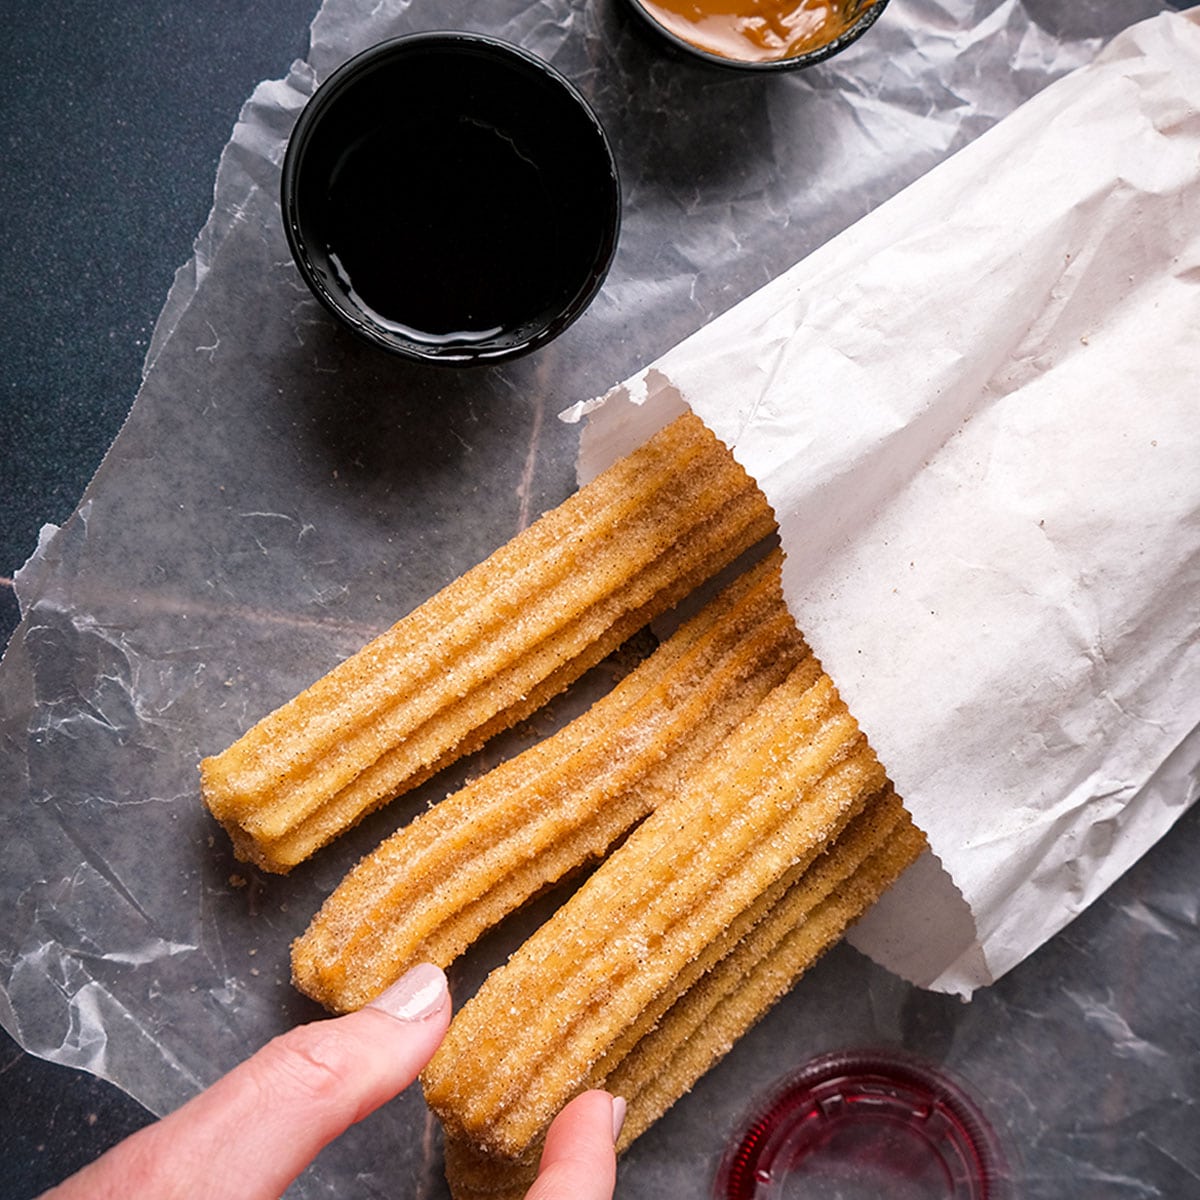 How to Reheat Churros to Get that Perfect Crispy Texture